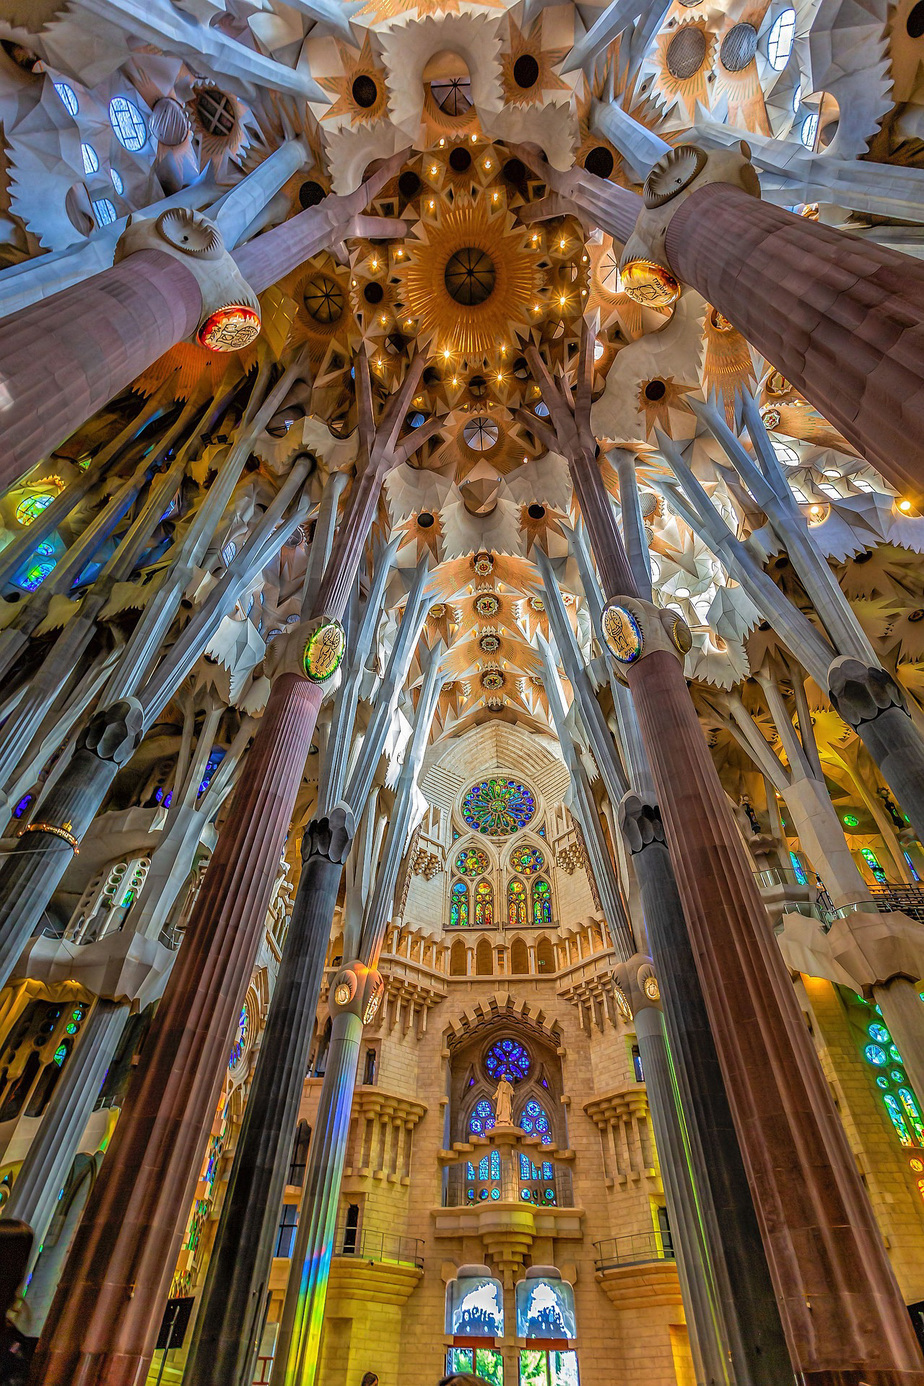 The Interior Of Barcelona's Sagrada Família, Designed By Antoni Gaudí. Construction Began In 1882- And It's Still Not Finished. It's Expected To Be Completed By 2026, Just In Time For The 100th Anniversary Of Gaudí's Death.